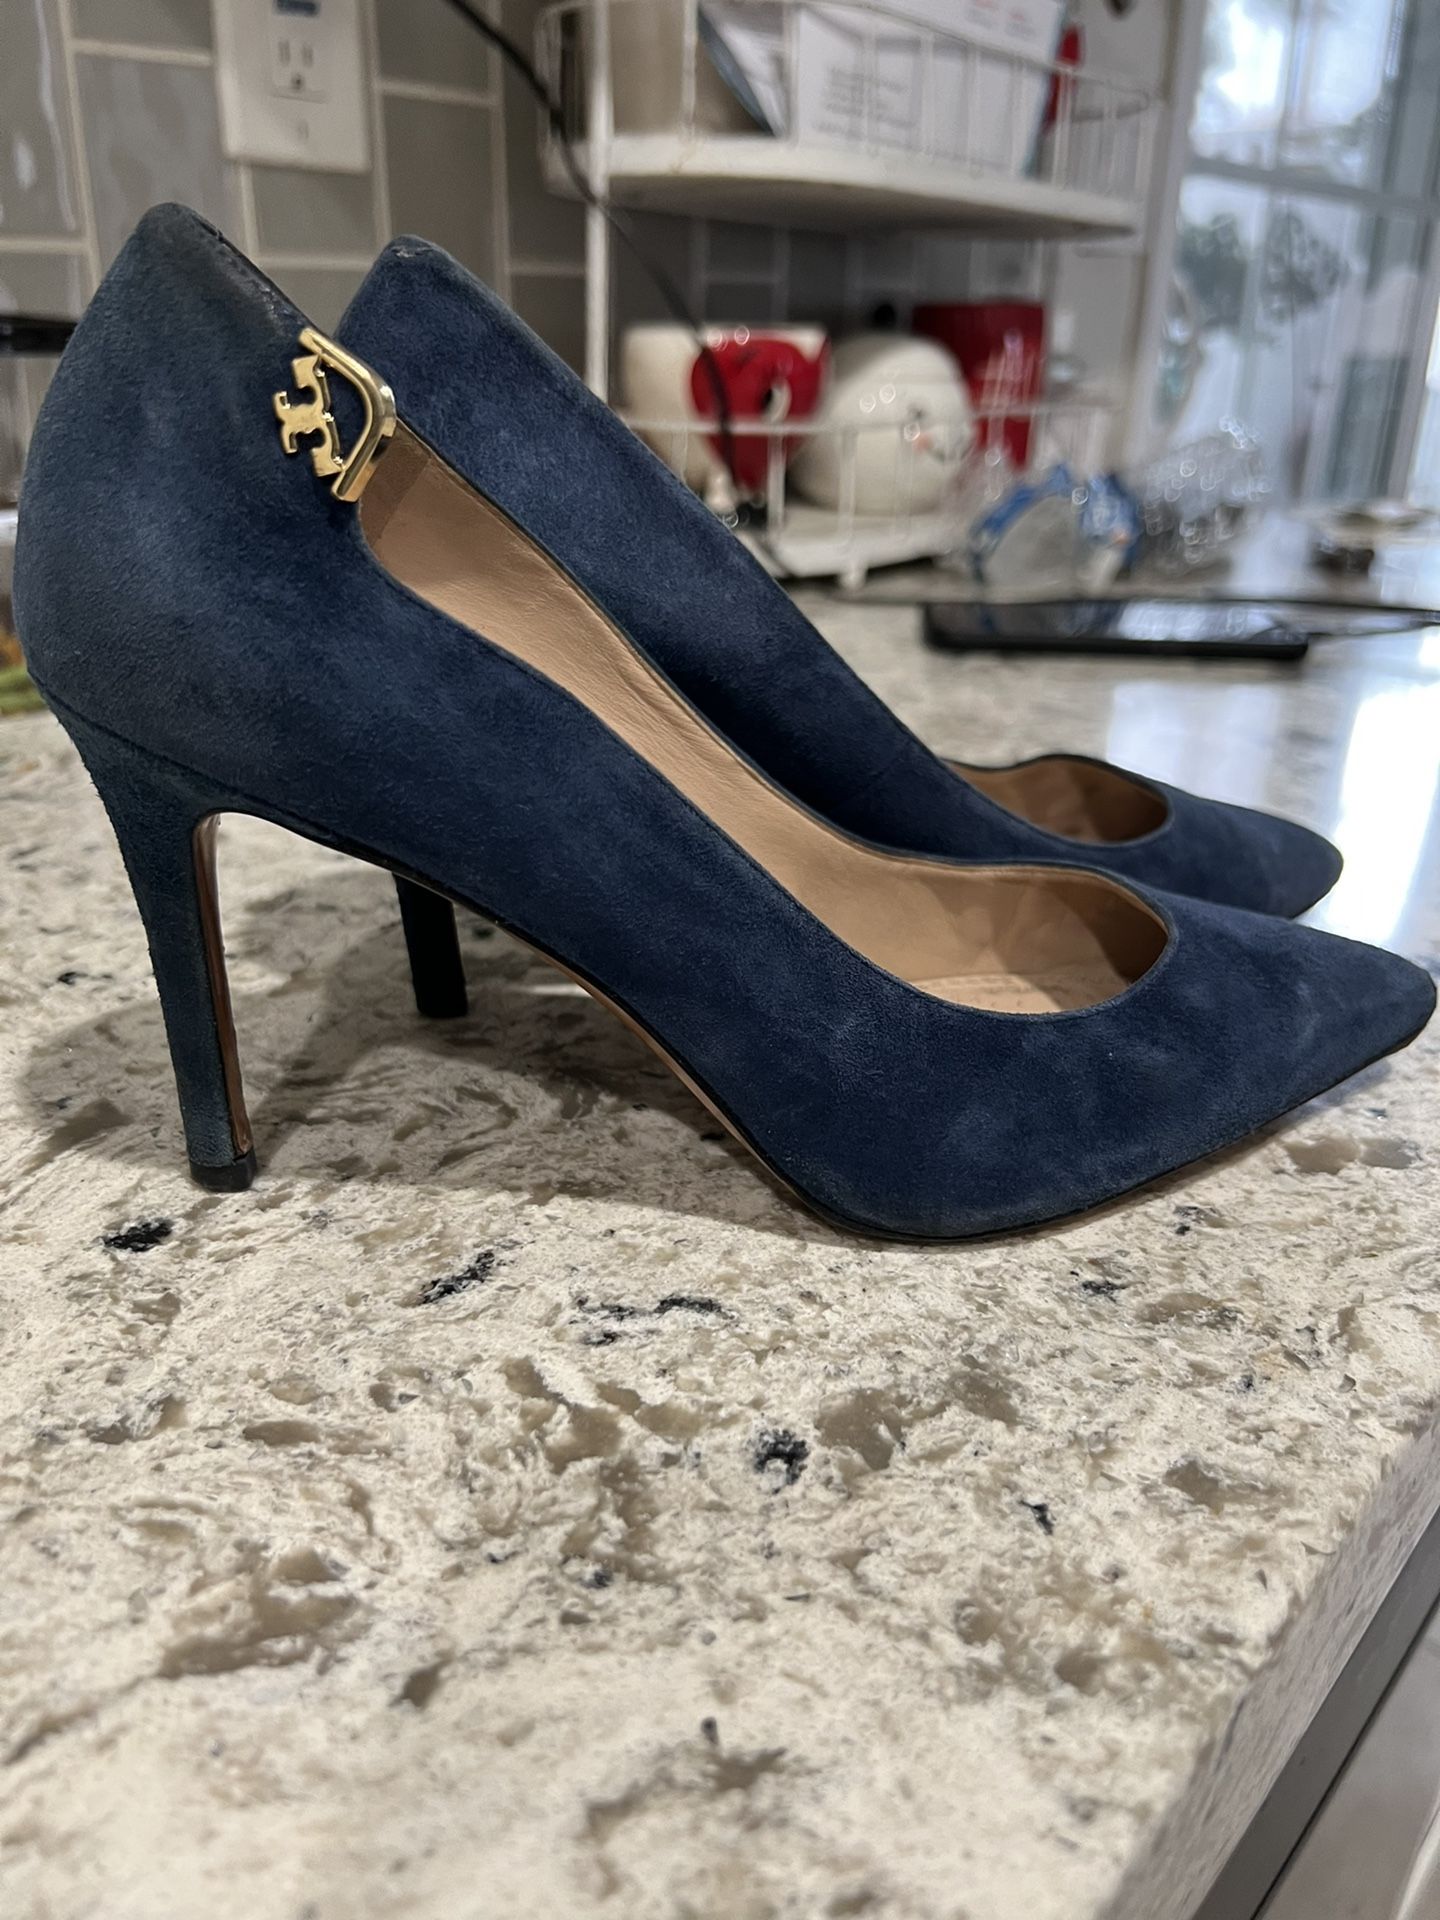 Tory Burch Heels (8) for Sale in City Of Industry, CA - OfferUp